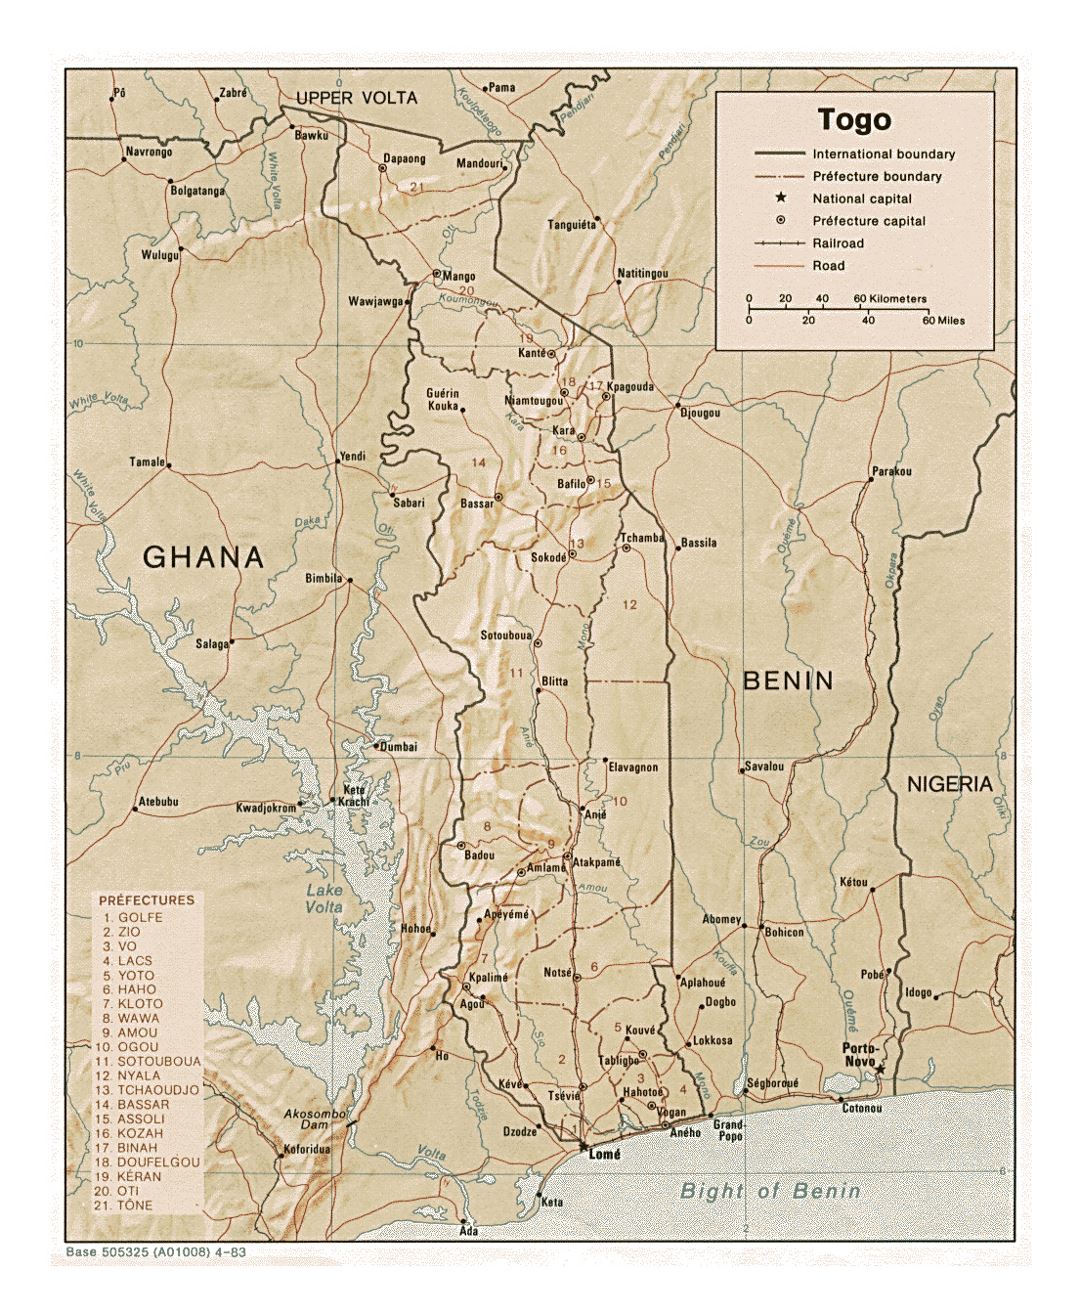 Detailed political and administrative map of Togo with relief, roads, railroads and major cities - 1983